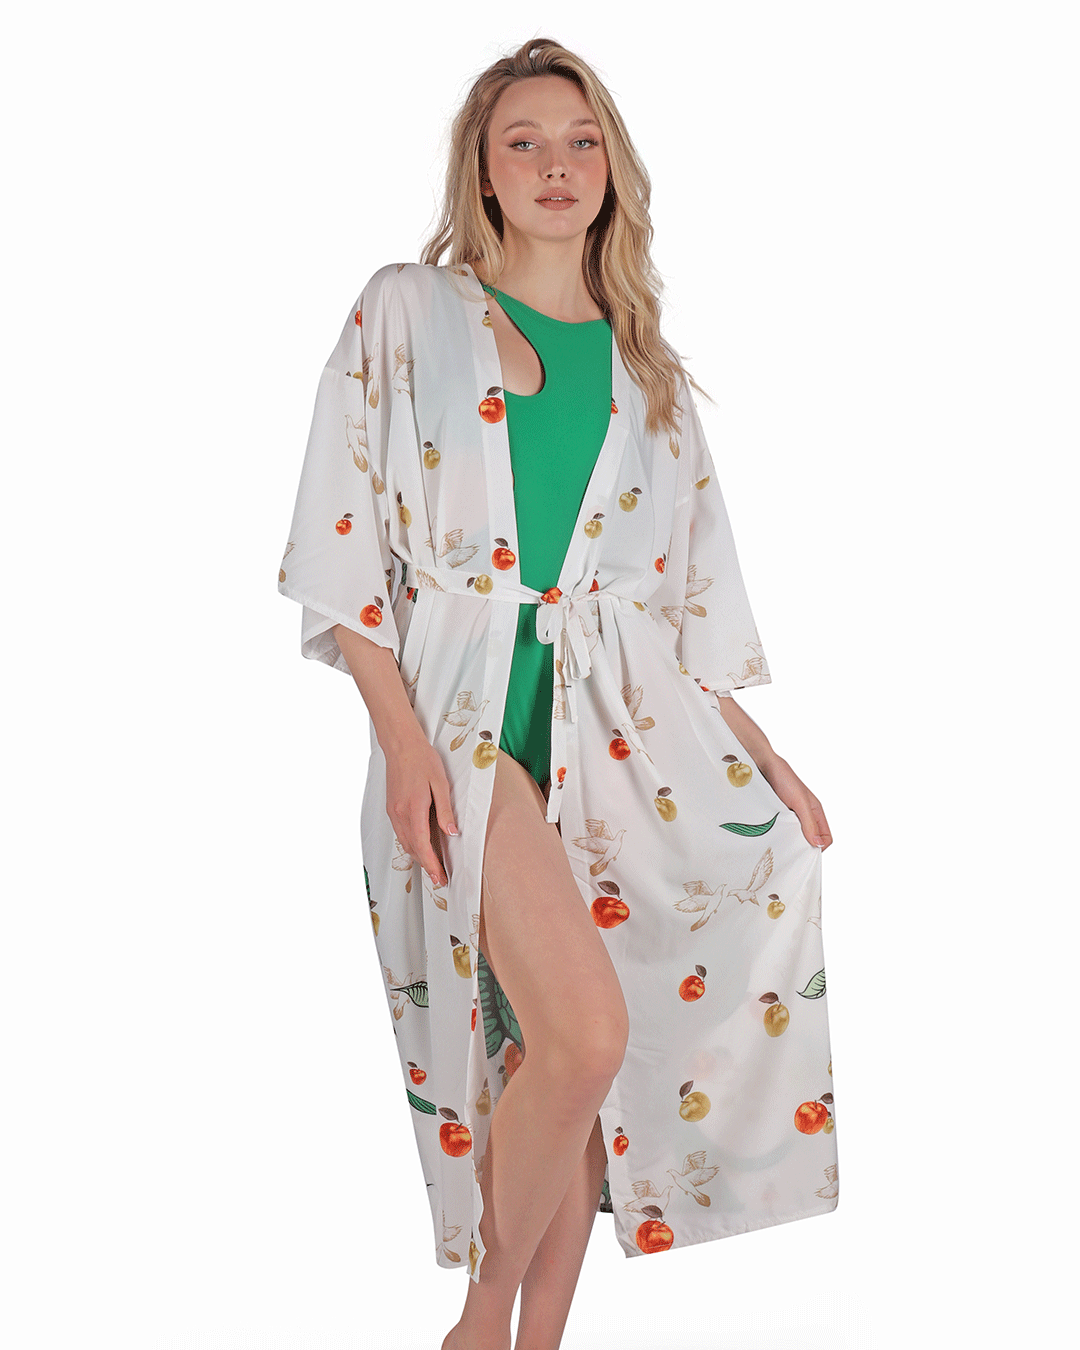 Swimwear Summer Peacock Cover-Up Self Belted Free Size - Bohemian